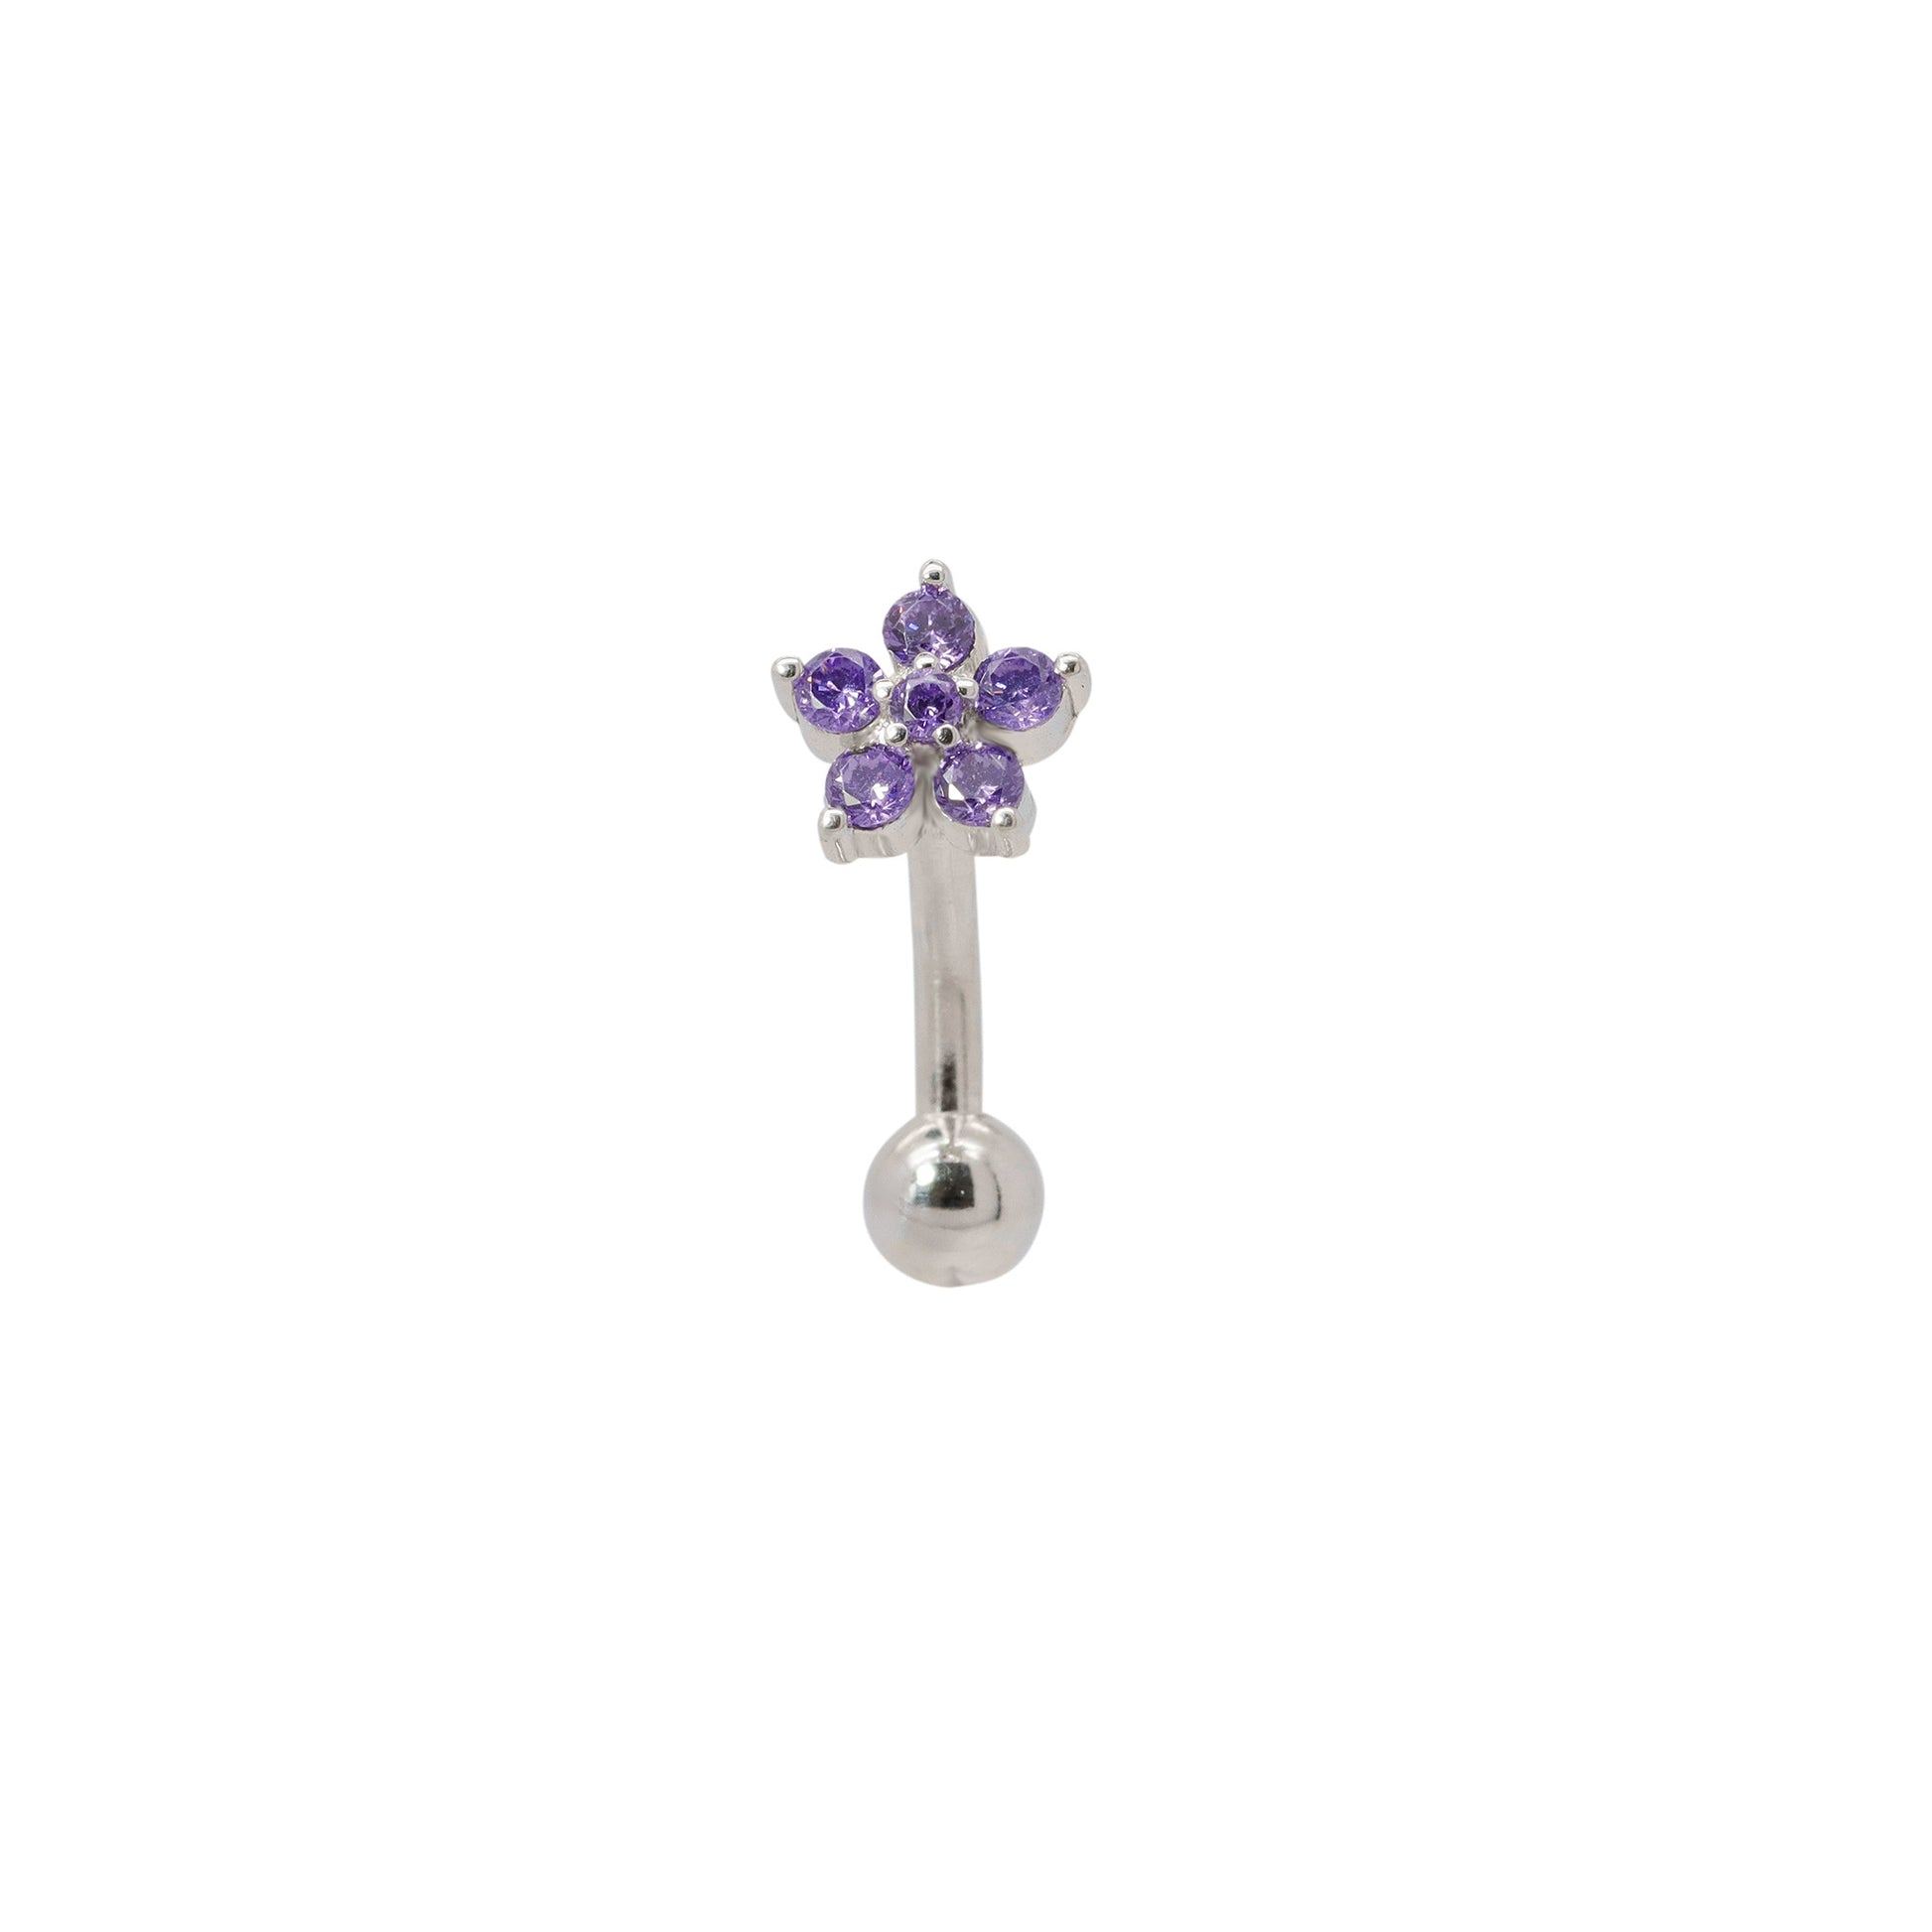 Solid 925 Silver | 16G 14G Purple Petite Flower Reverse Belly Ring | 6mm 1/4" 8mm 5/16" 10mm 3/8" - Sturdy South